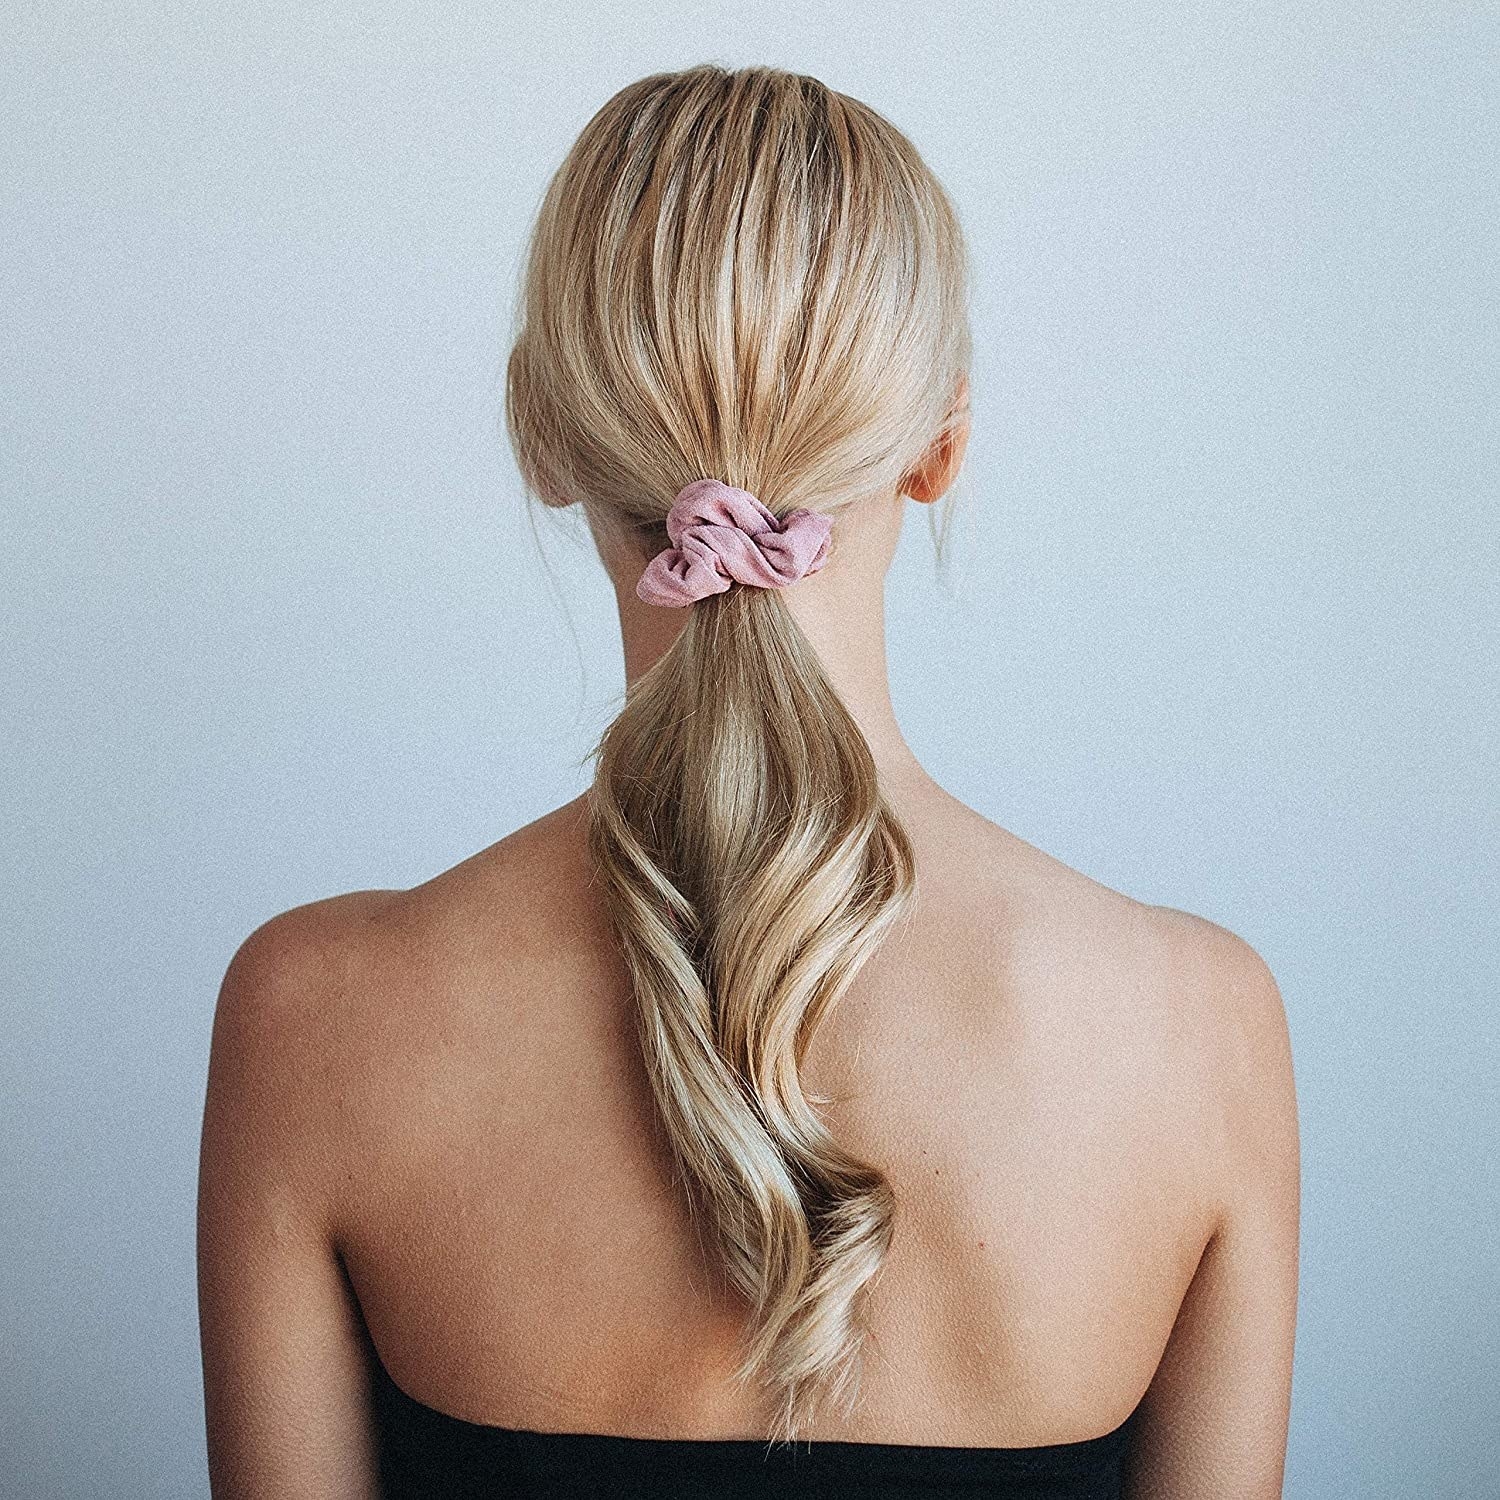 model with pink Kitsch scrunchie holding up blonde ponytail